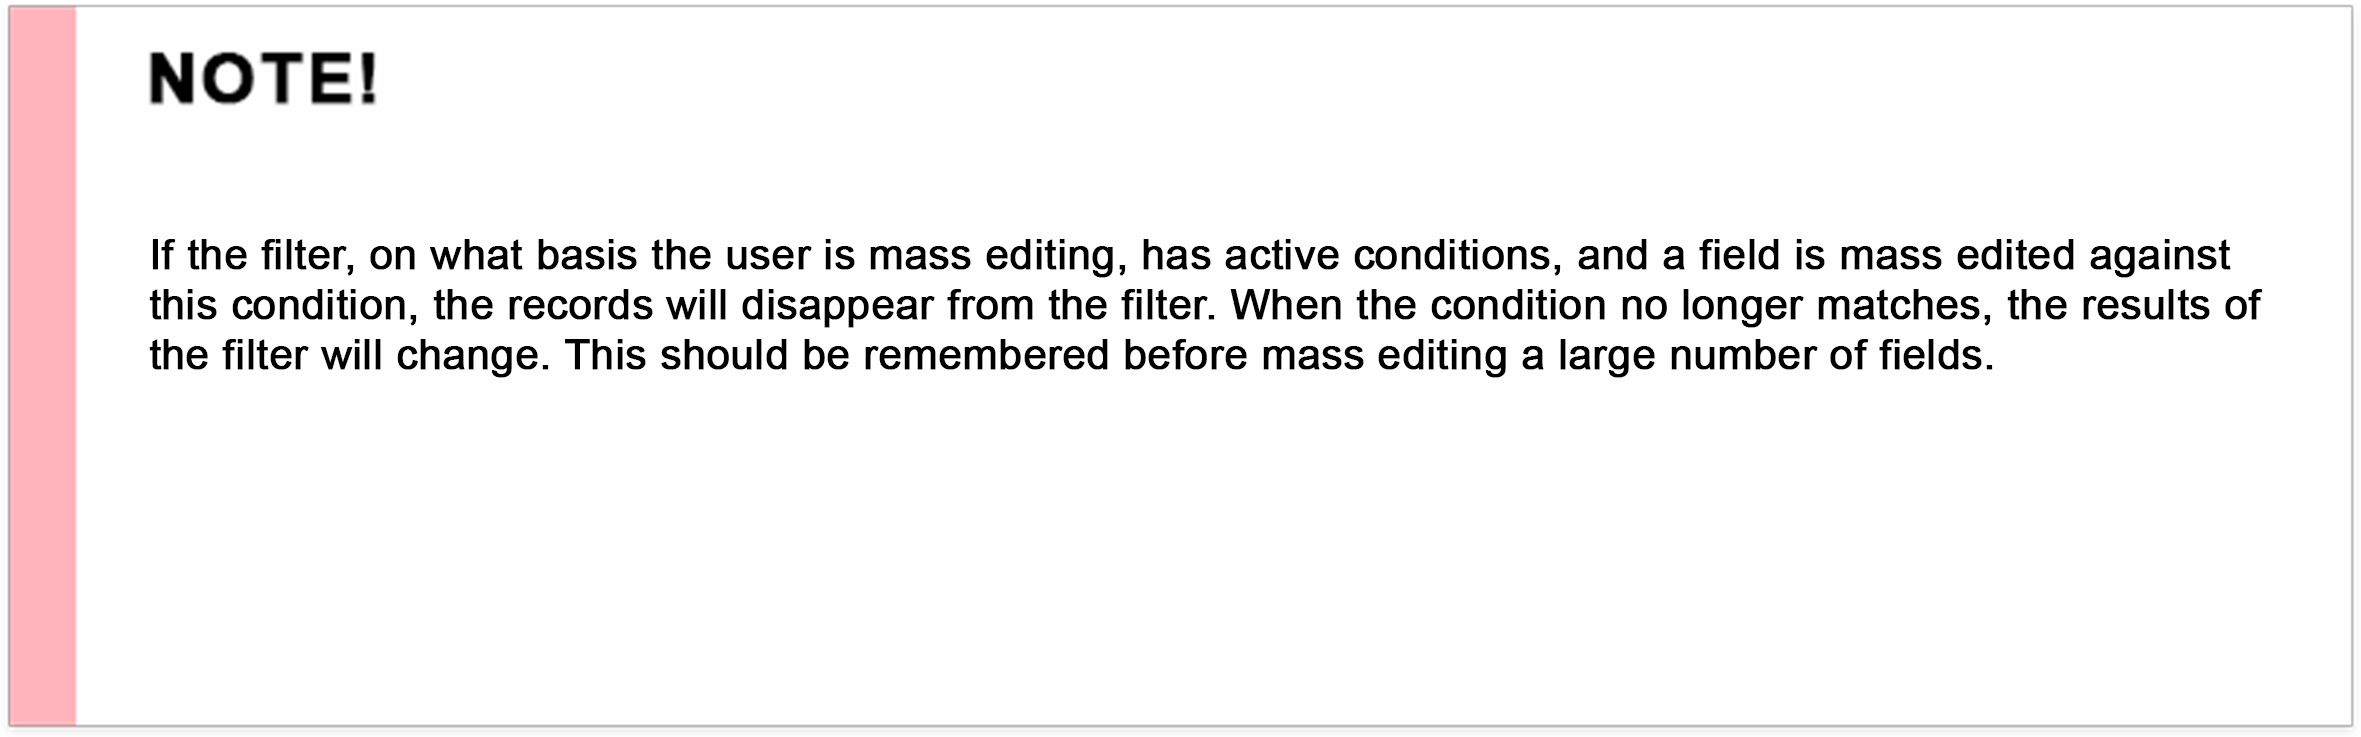 If the filter, on what basis the user is mass editing, has active conditions, and a field is mass edited against this condition, the records will disappear from the filter. When the condition no longer matches, the results of the filter will change. This should be remembered before mass editing a large number of fields.